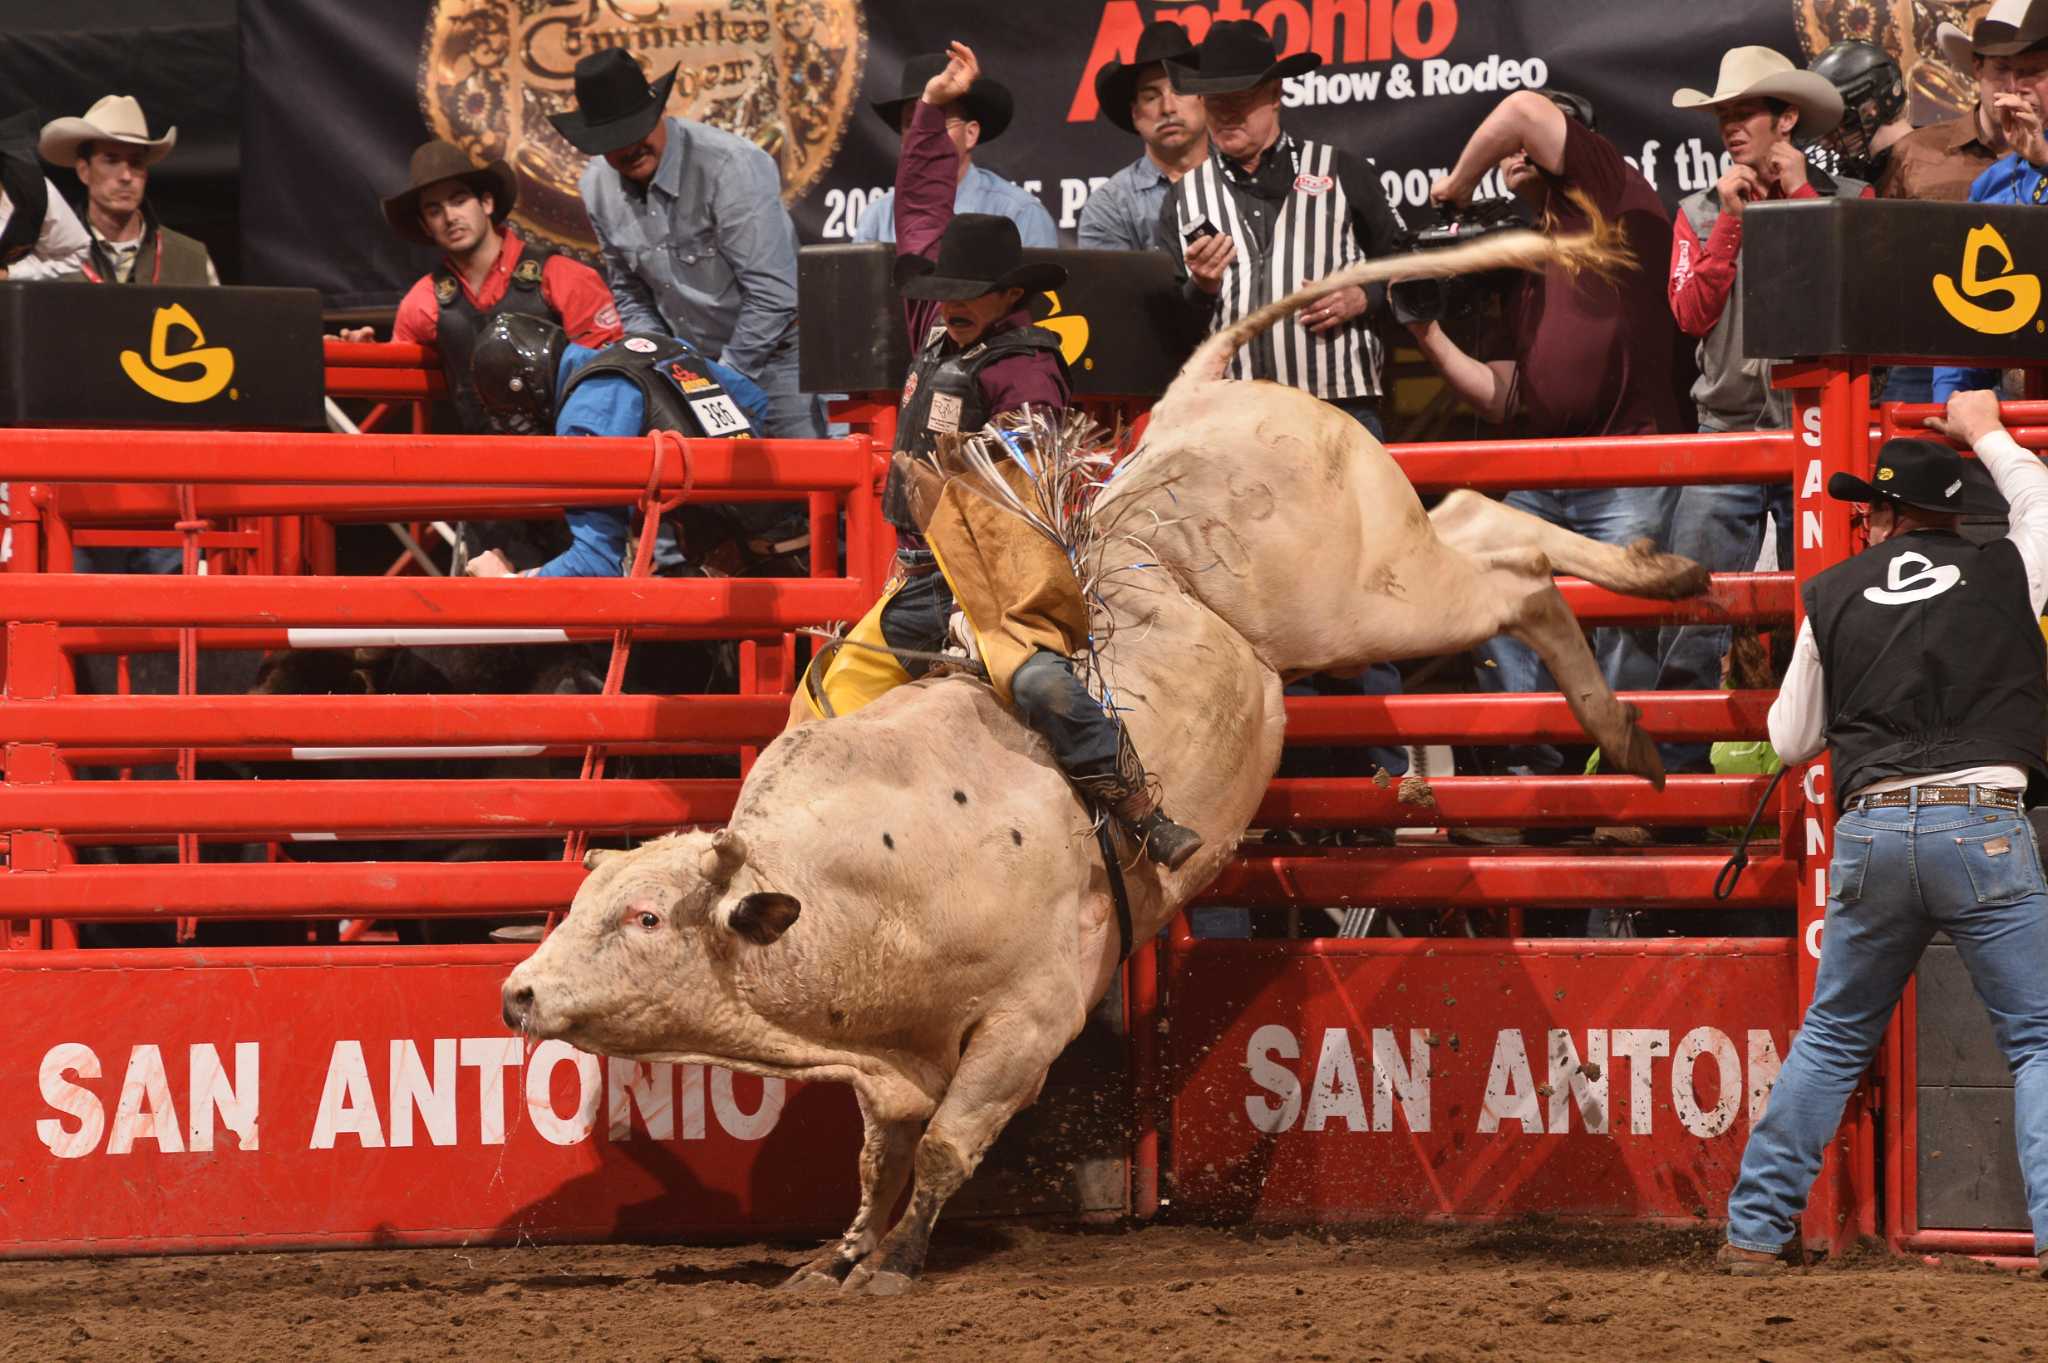 College rodeo events back for second year